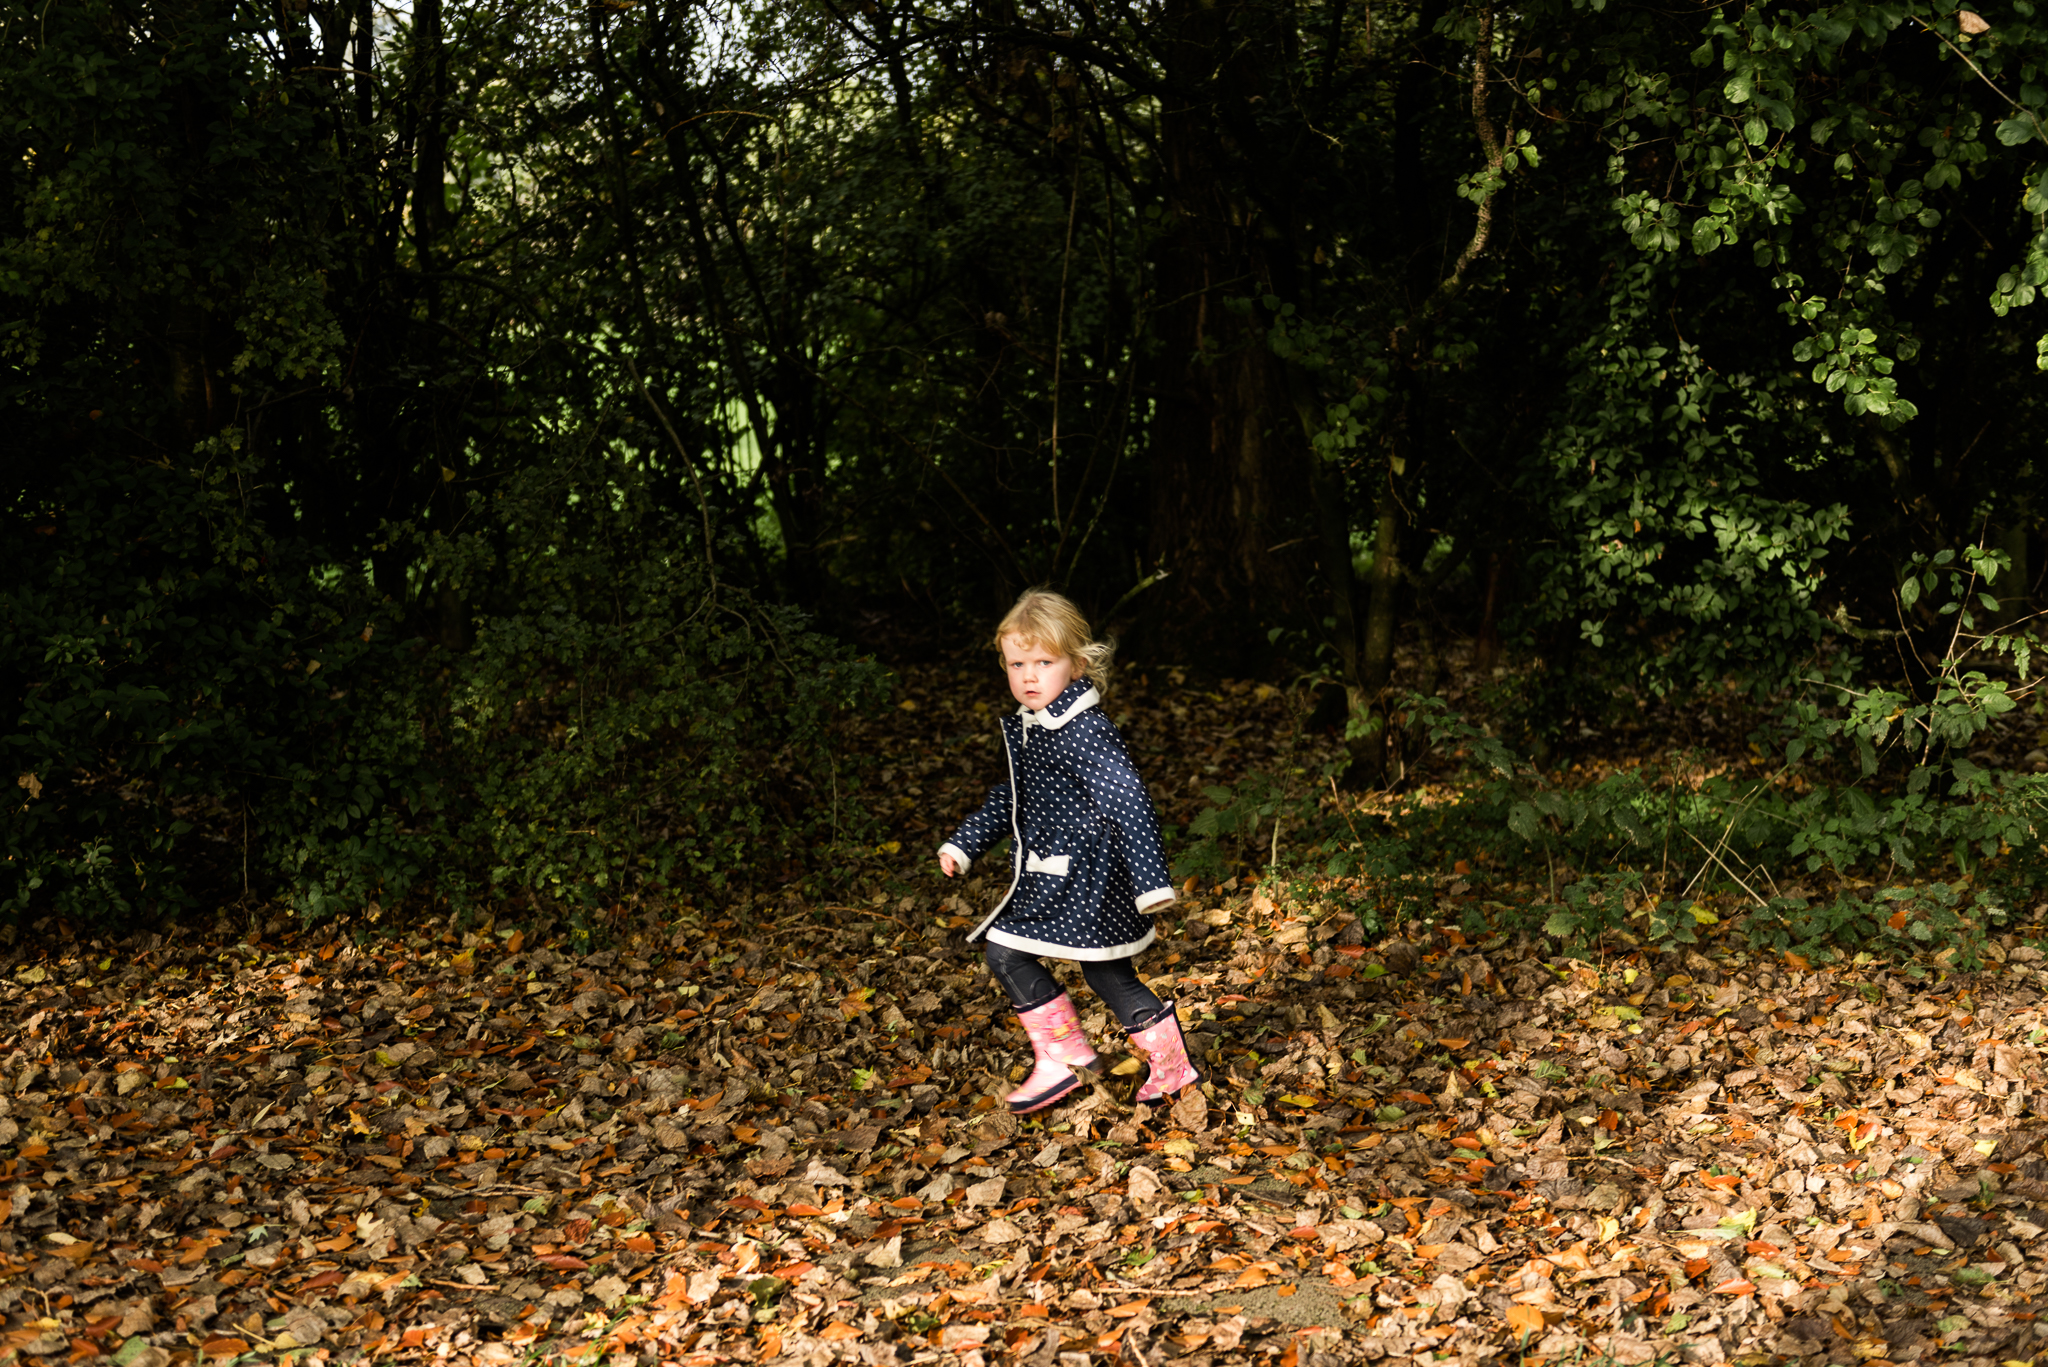 Staffordshire Documentary Family Photography Autumn Lifestyle Fall Leaves - Jenny Harper-13.jpg